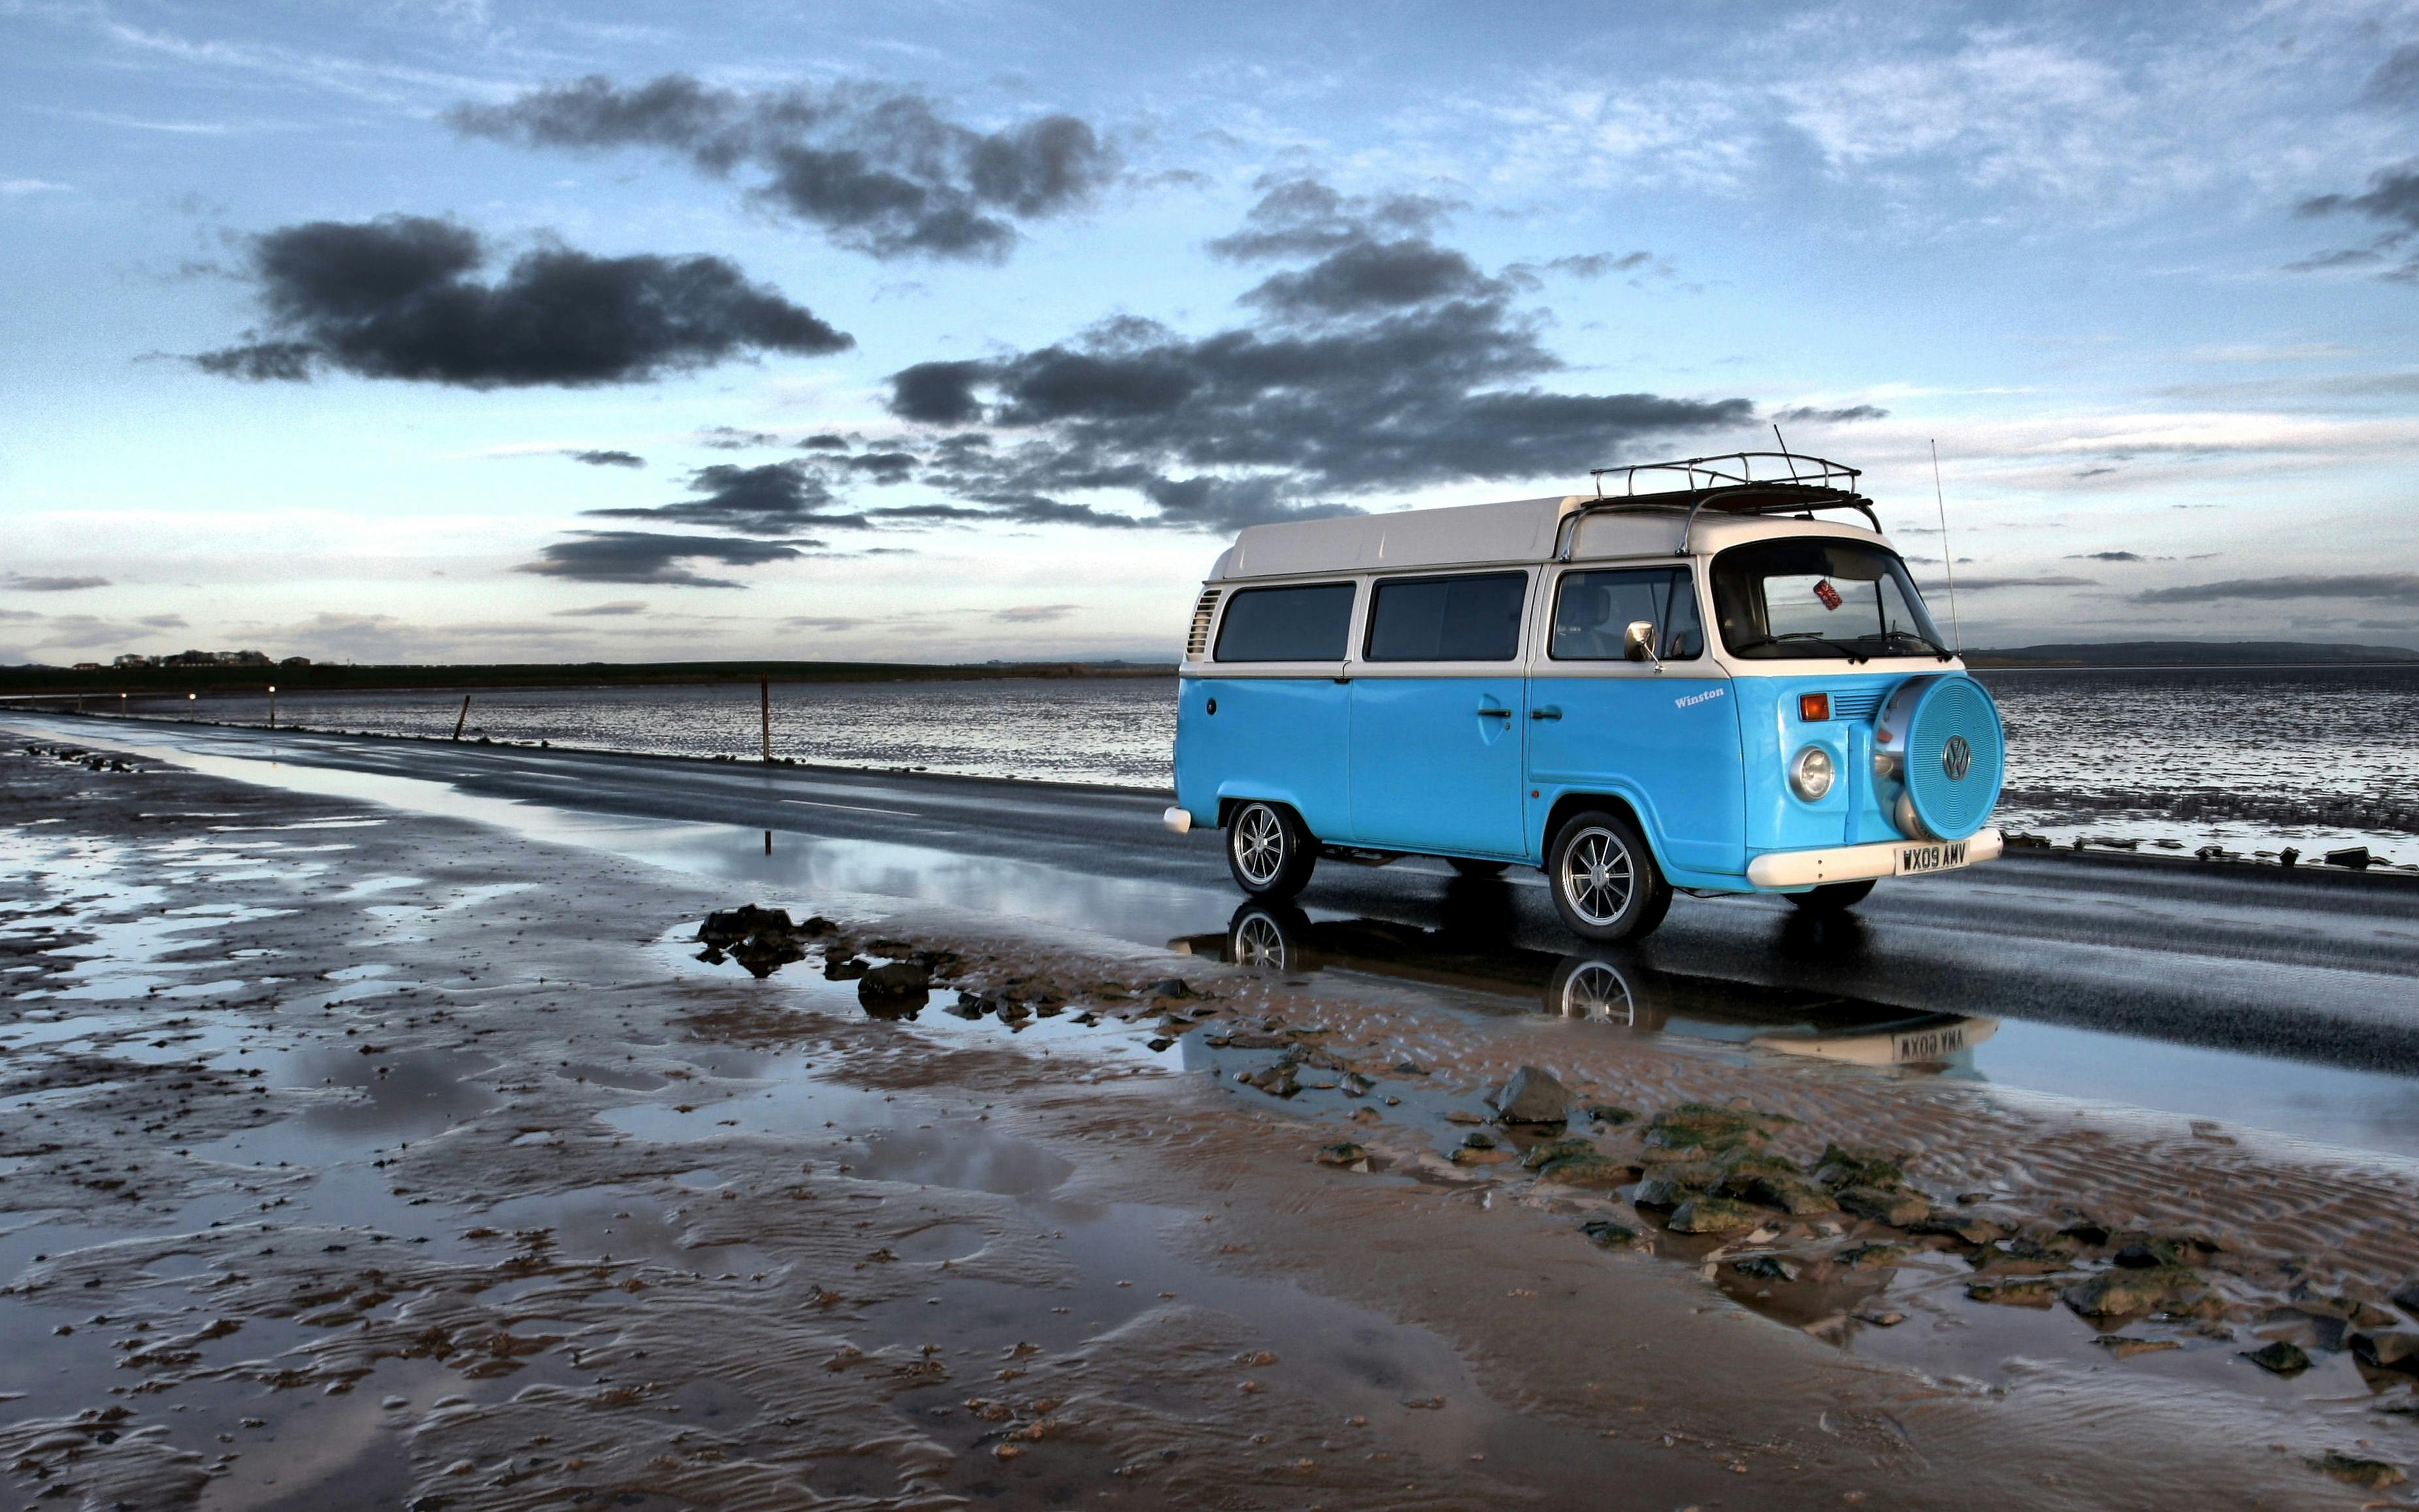 9+ Thousand Campervan Nature Royalty-Free Images, Stock Photos